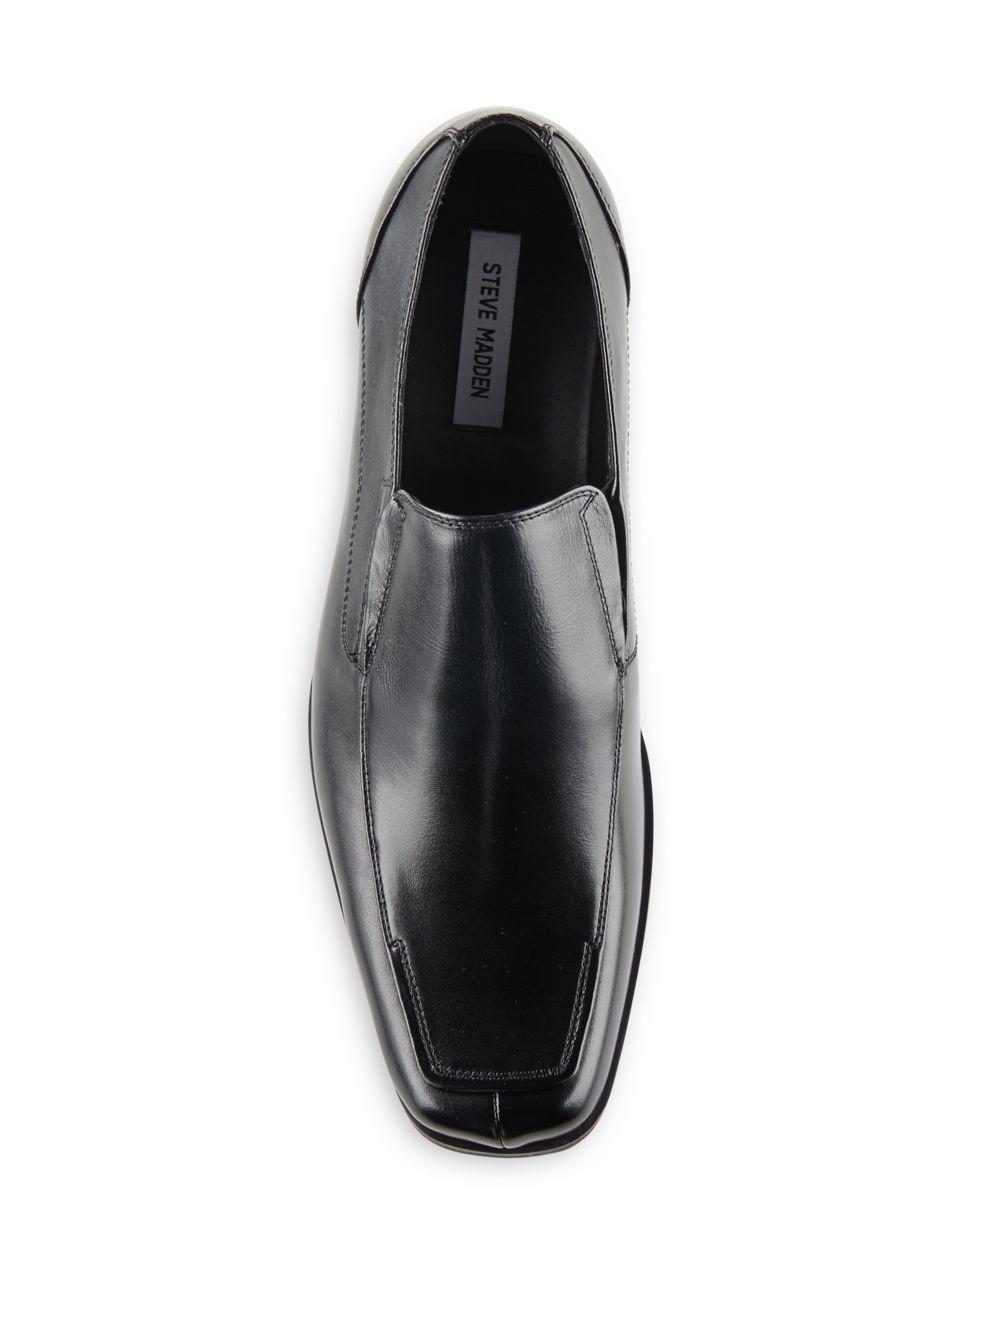 Steve Madden Leather Square-toe Loafers in Black for Men - Lyst